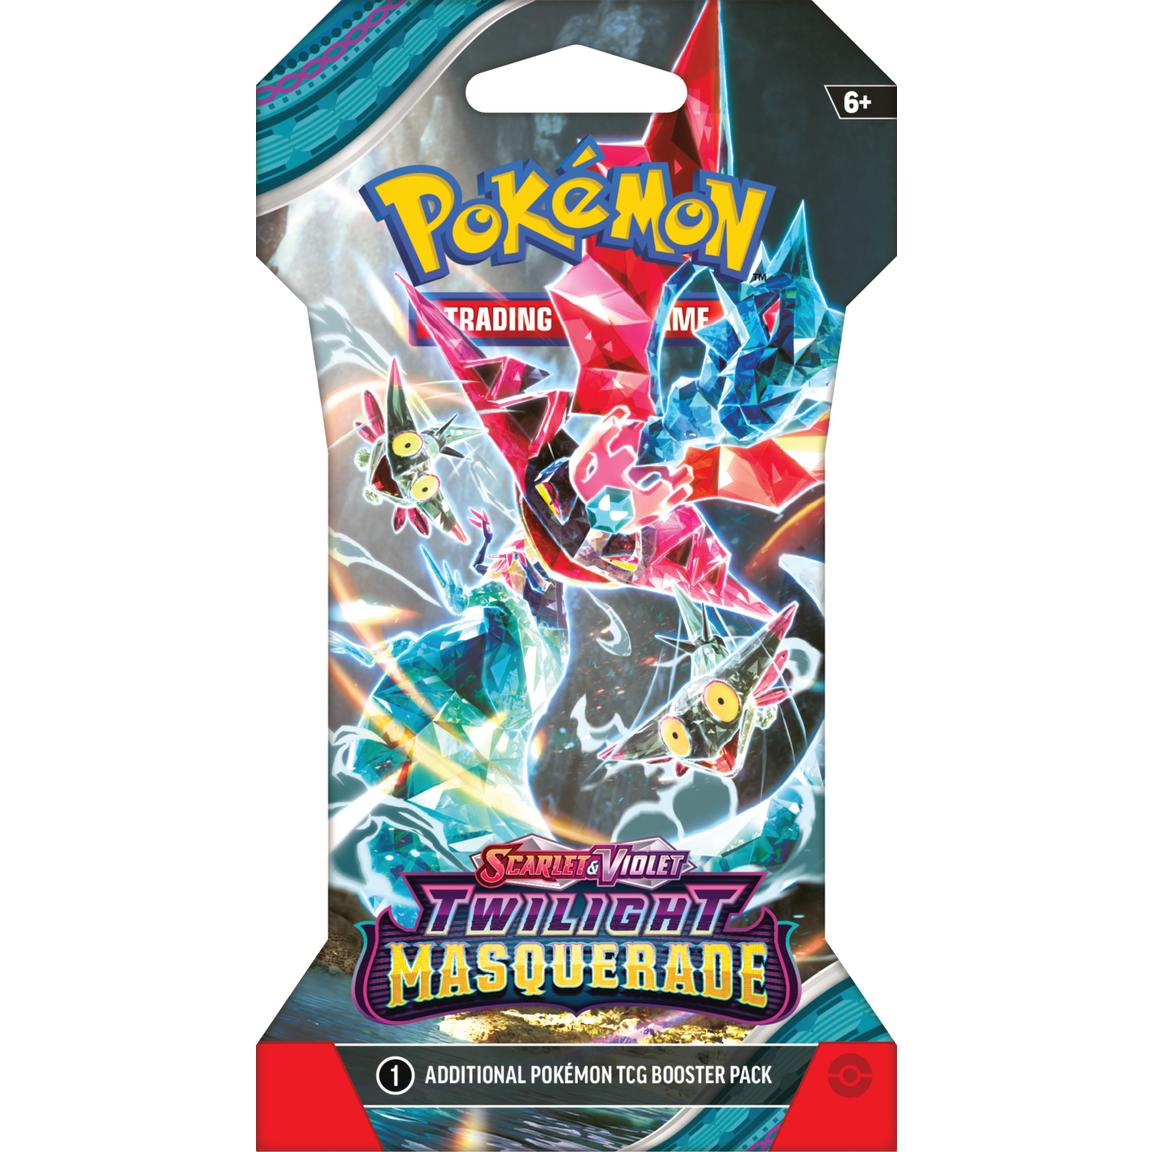 Pokémon TCG: Scarlet and Violet Twilight Masquerade Sleeved Booster [Assorted]